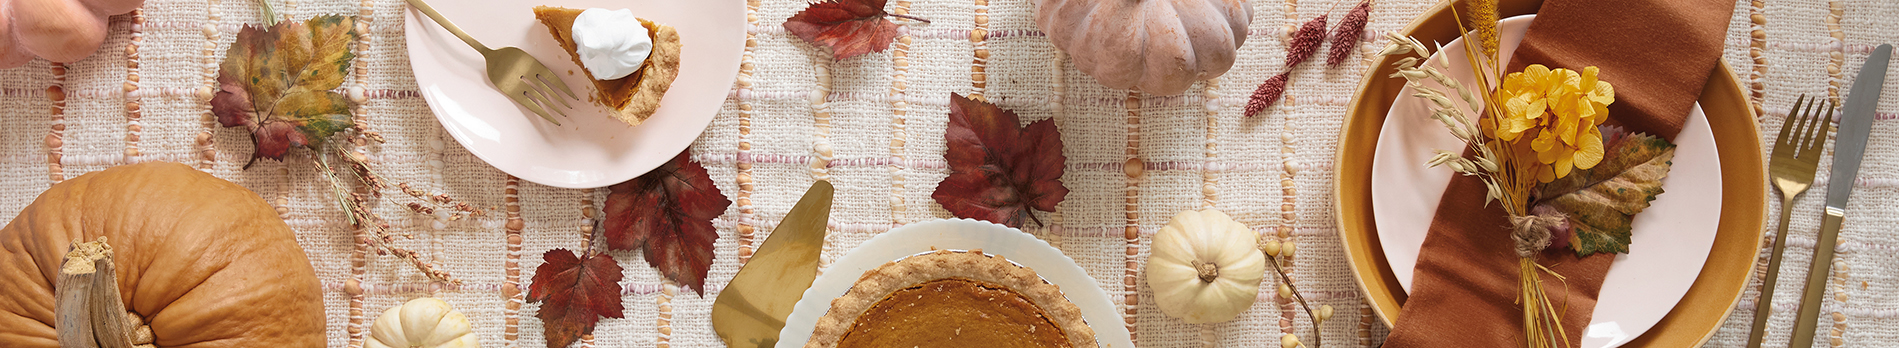 Thanksgiving background with place settings, pumpkin pie and fall boards scattered on a rustic linen tablecloth.